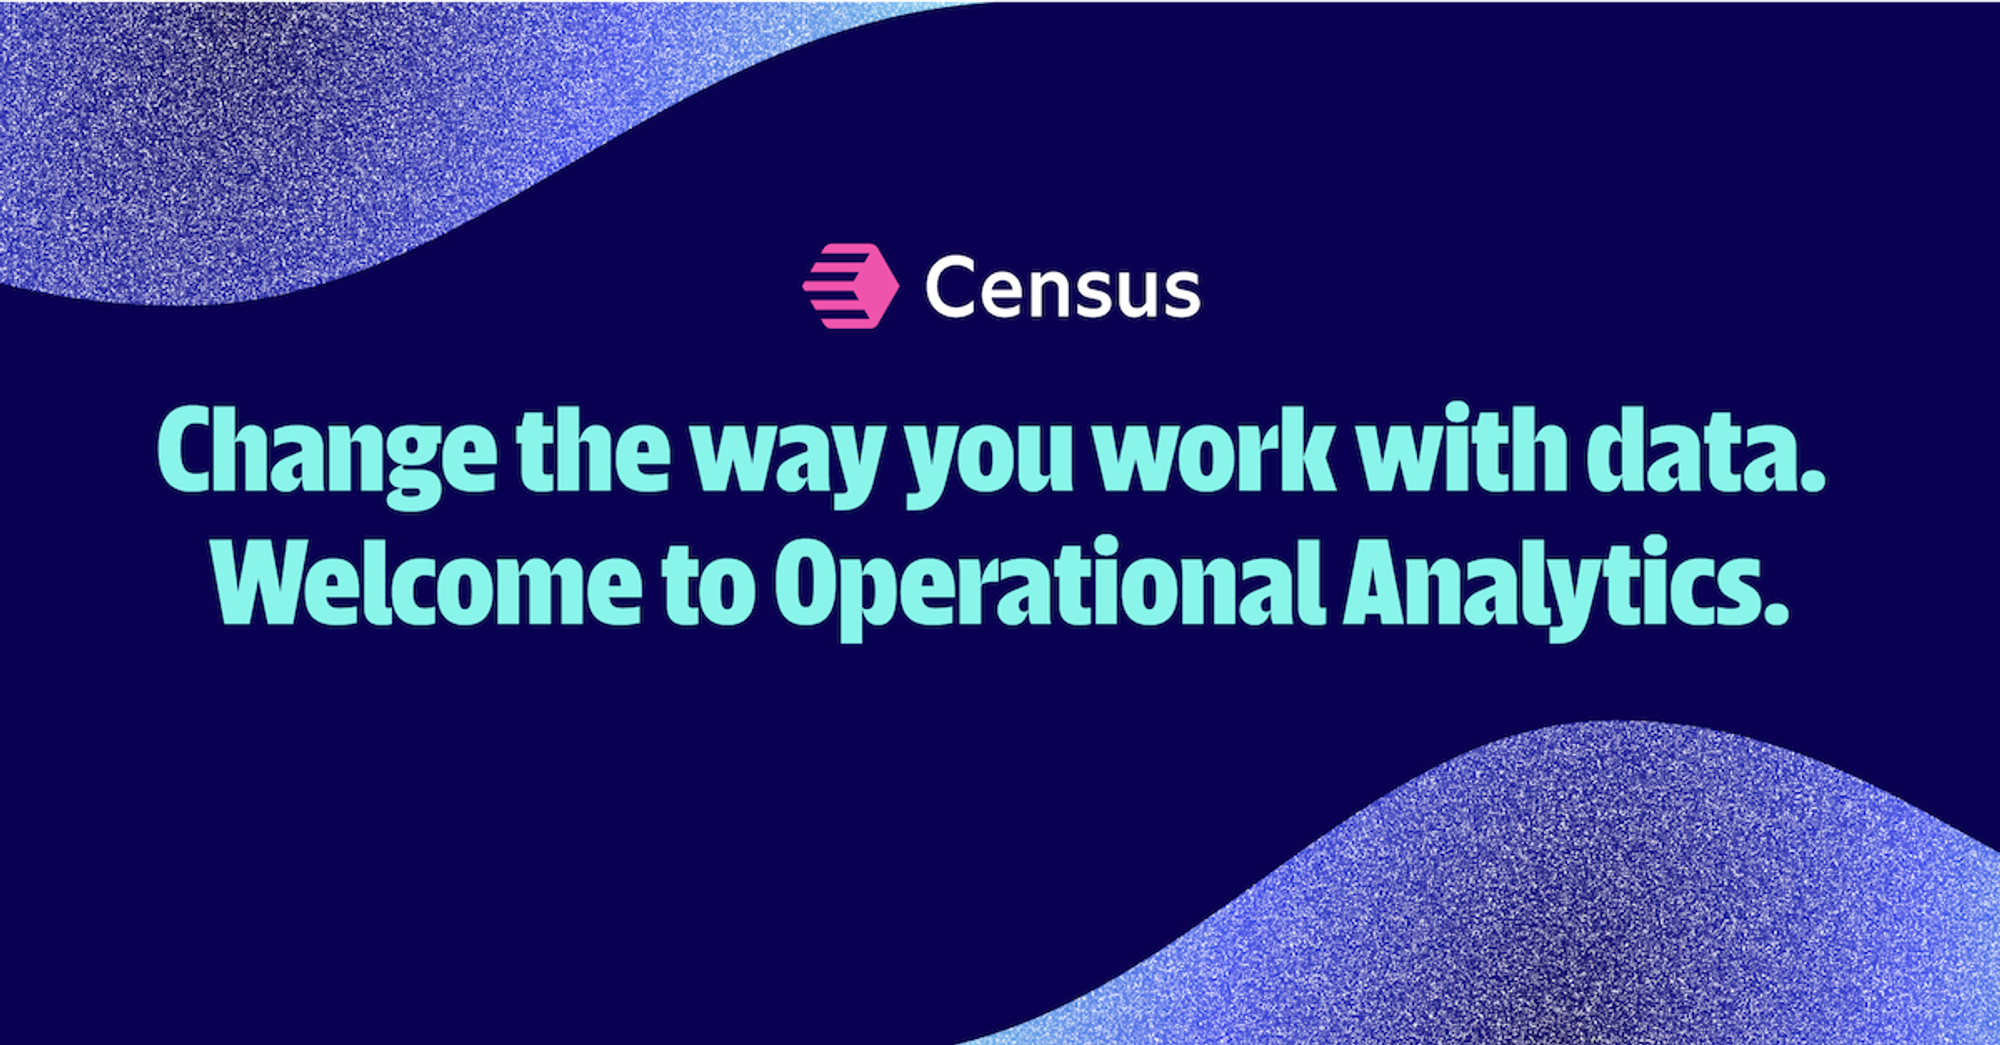 Our Product | Census